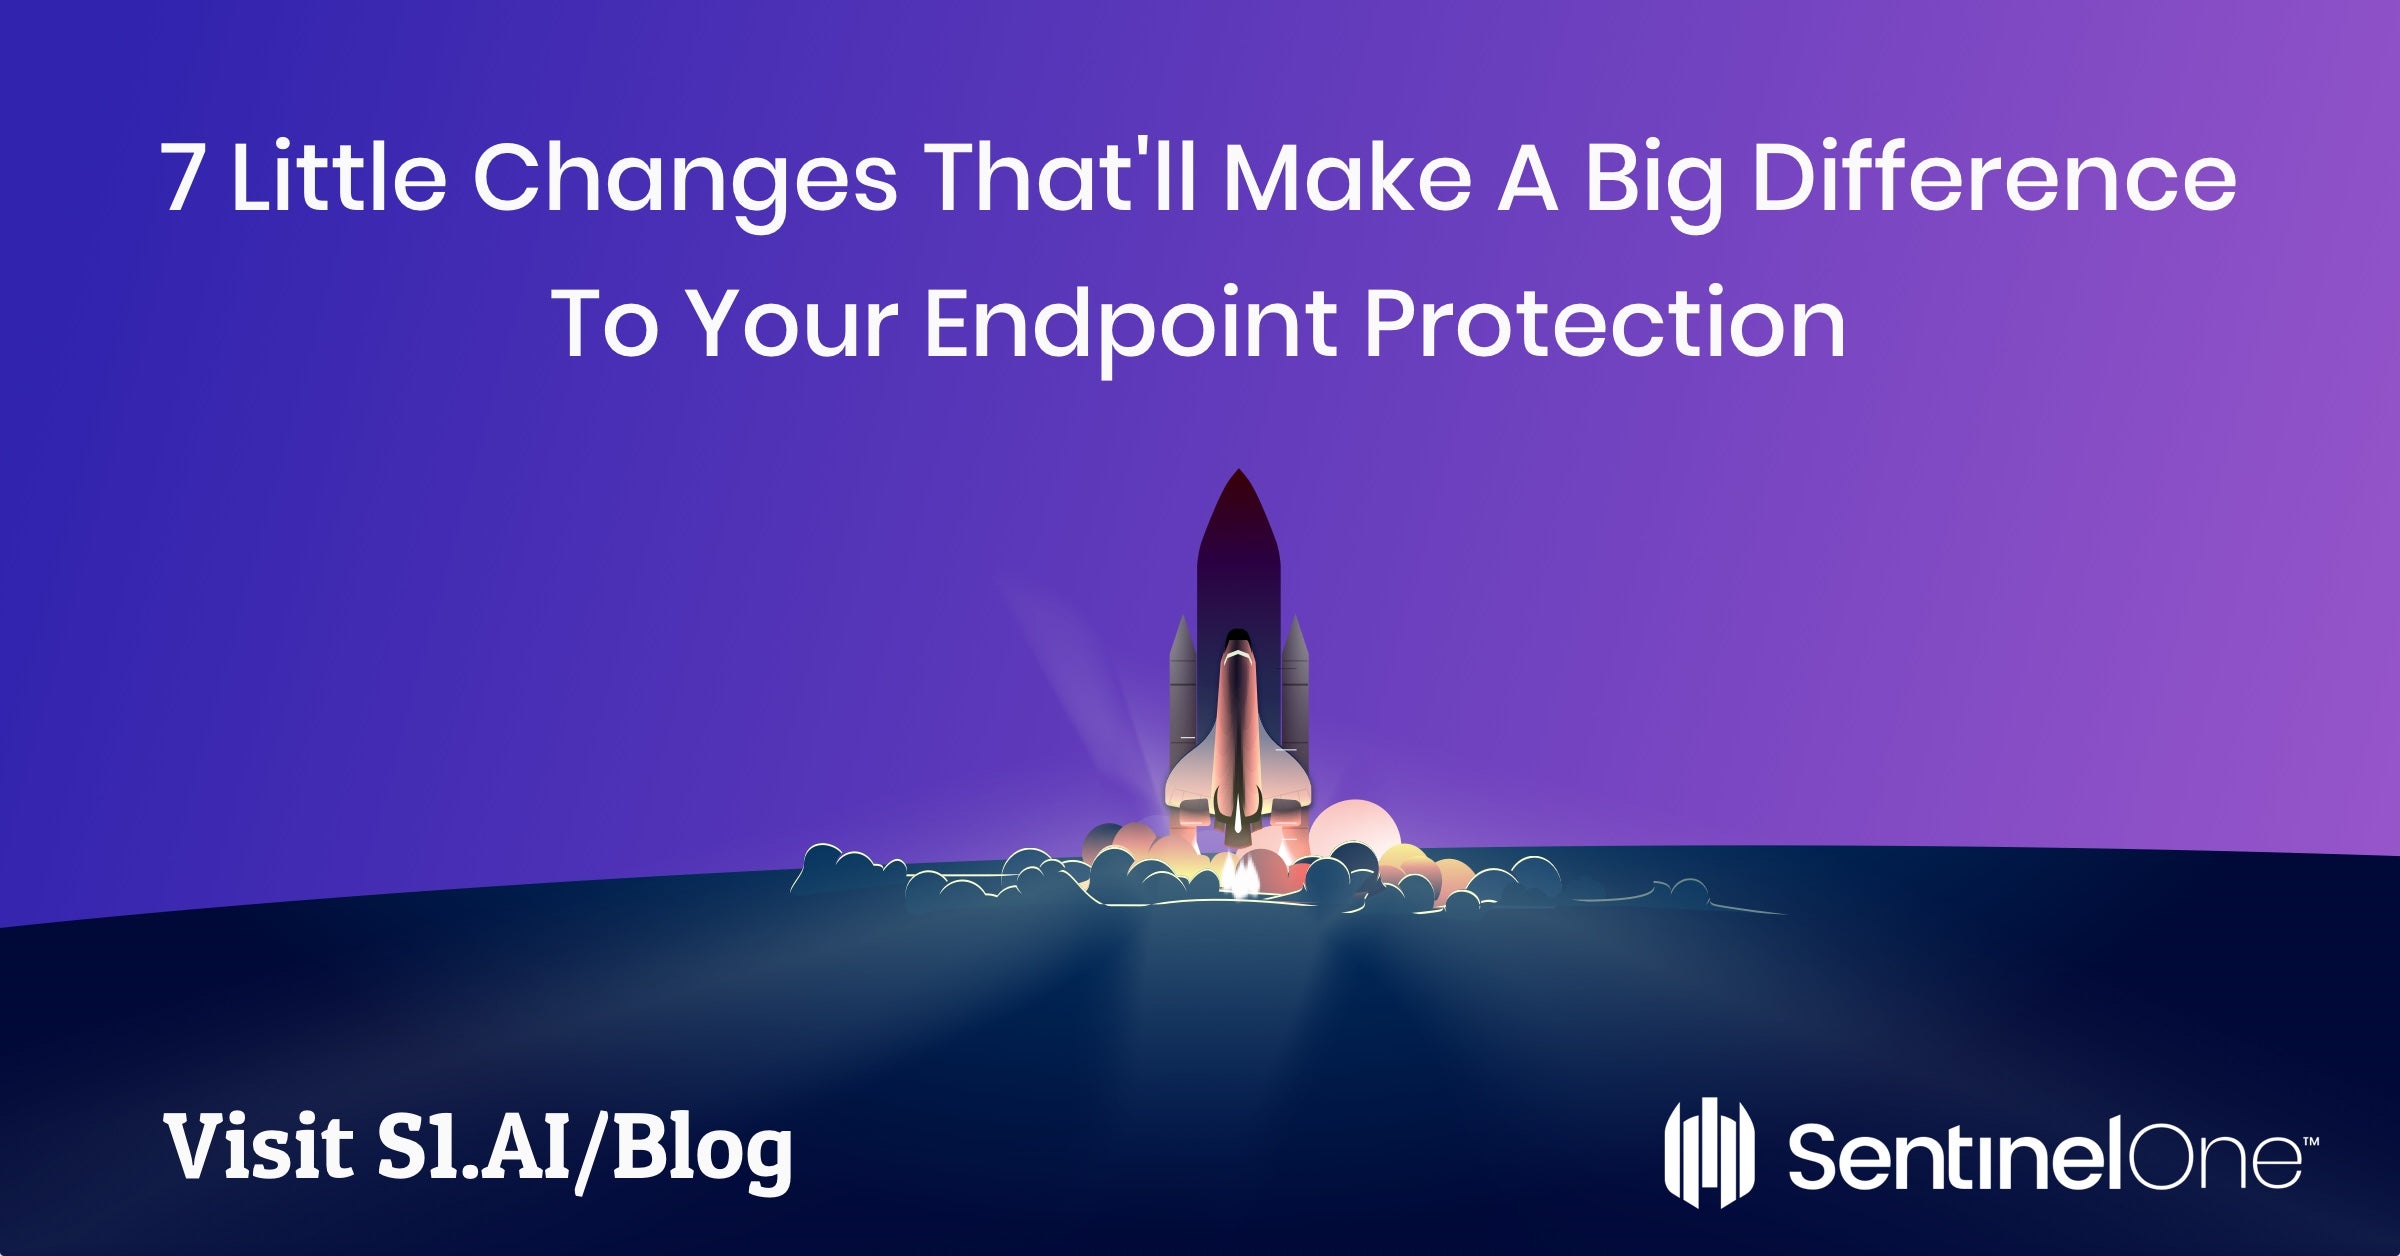 7 Little Changes That'll Make A Big Difference To Your Endpoint Protection